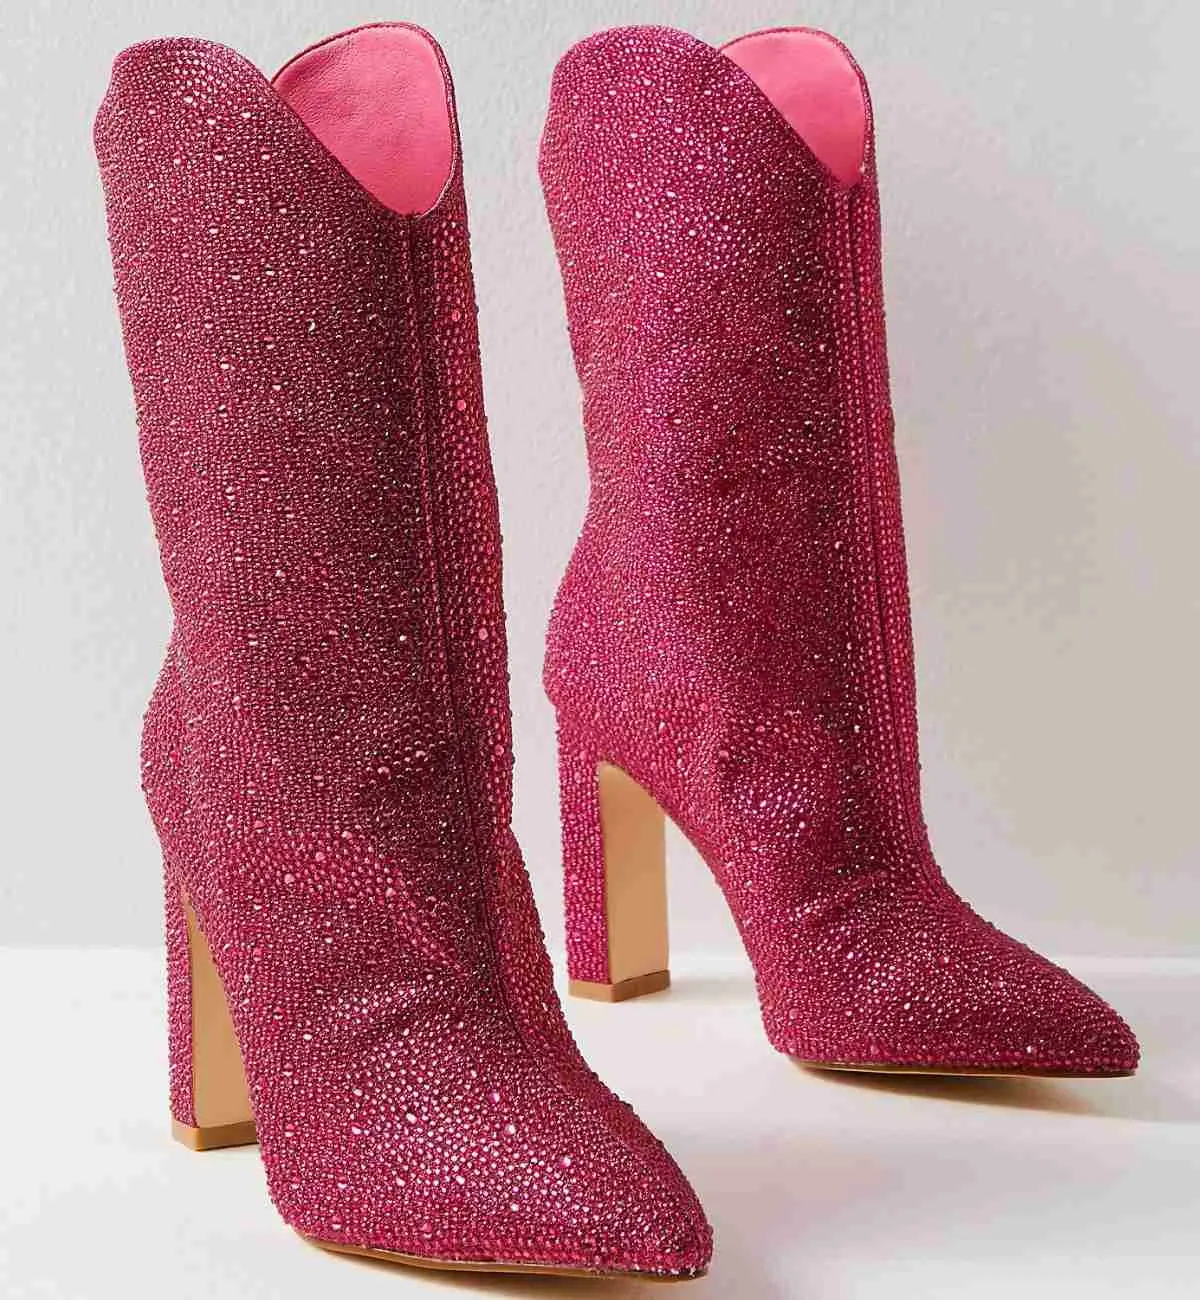 Hot Pink Barbie Core Fashion western sparkly high heel booties with on white background.